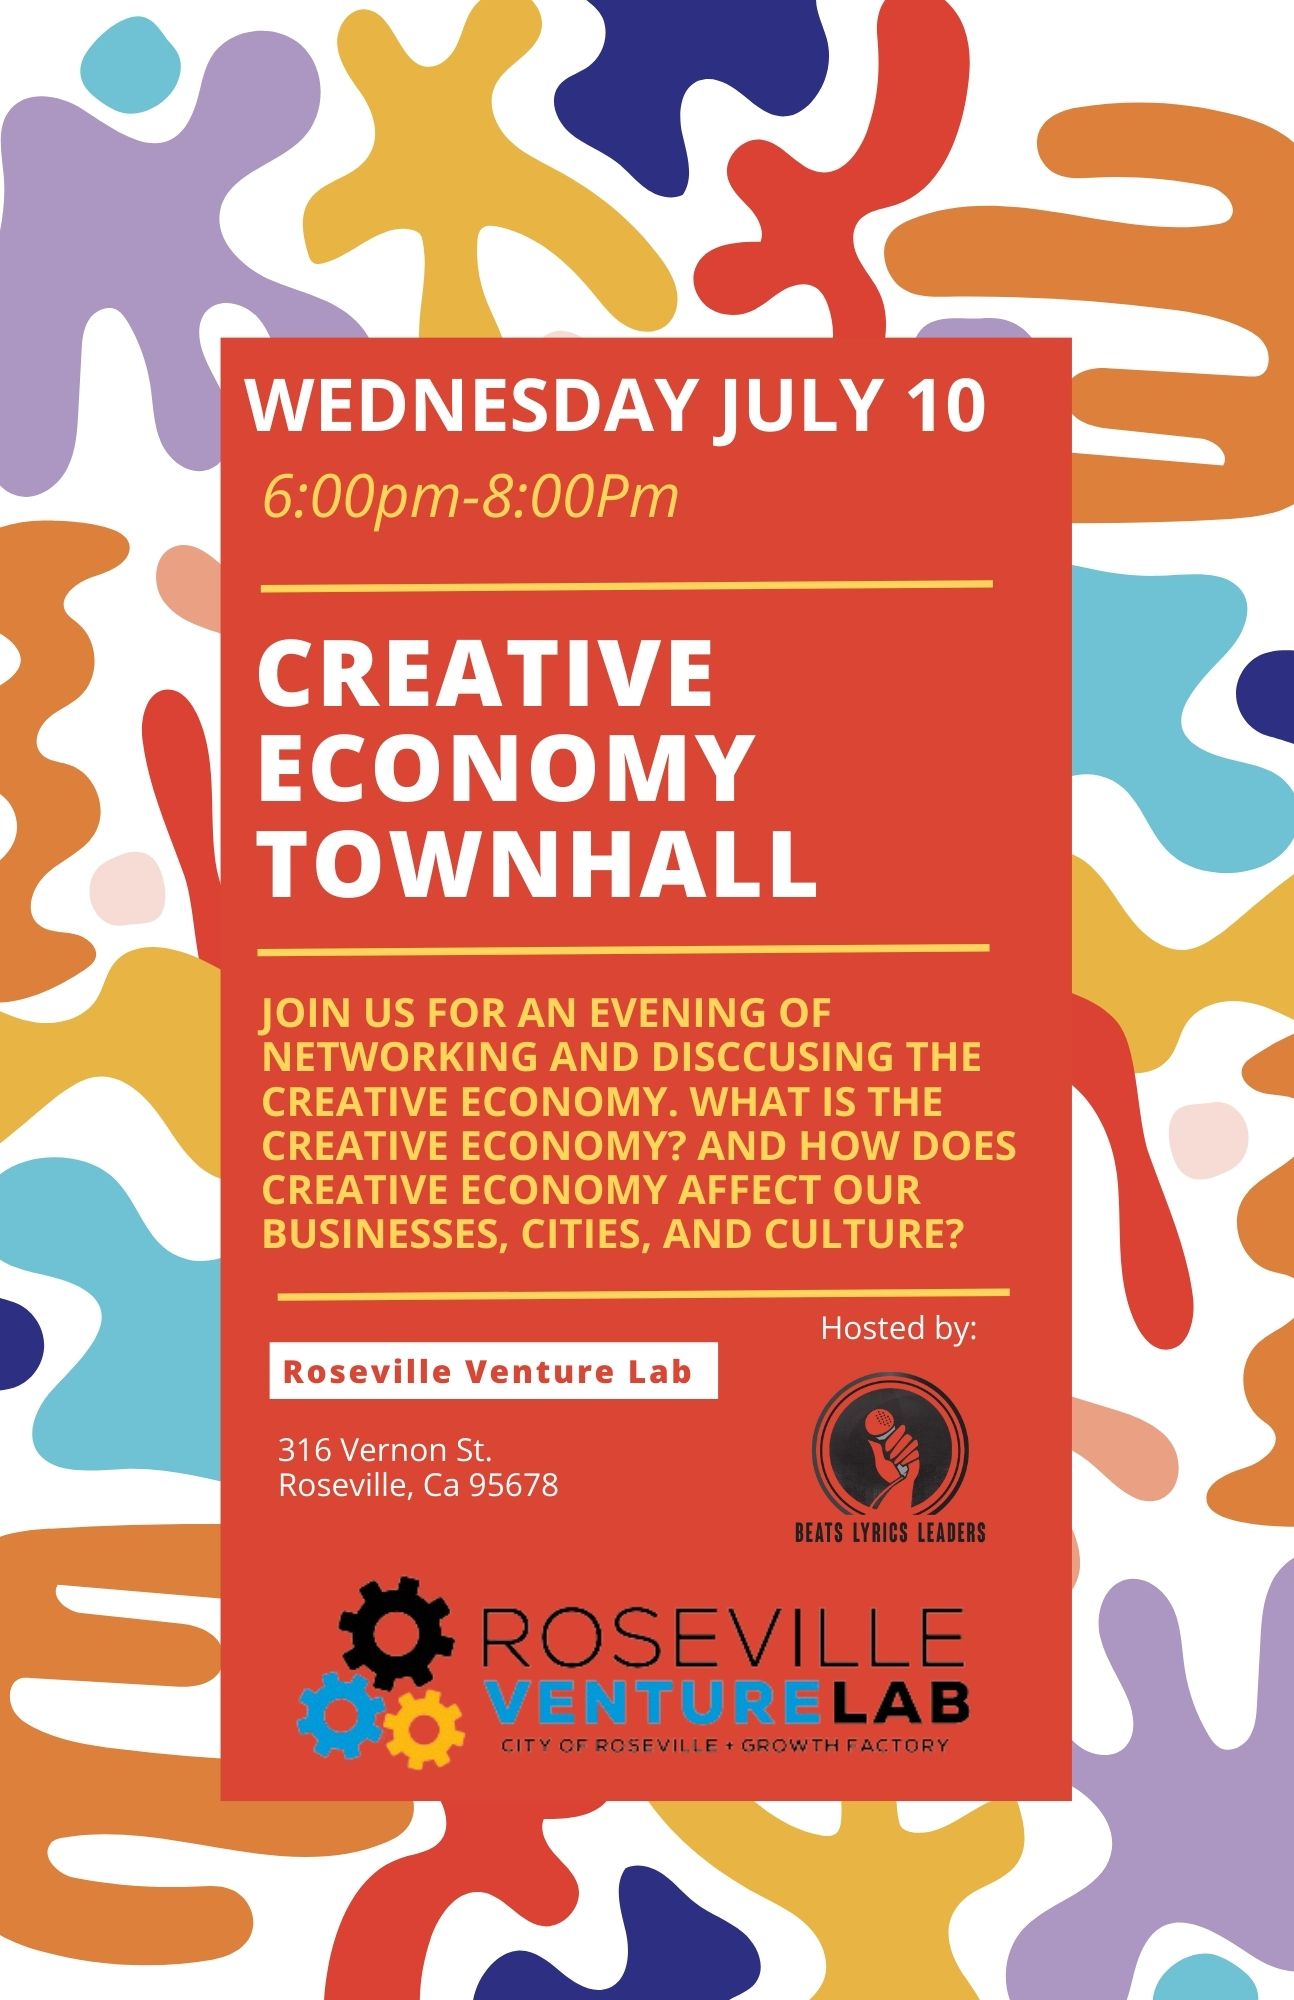 Wednesday July 10 6 - 8 p.m. Creative Economy Townhall Join us for an evening of networking and discussing the creative economy. Roseville Venture Lab 316 Vernon St. Roseville, Ca 95678